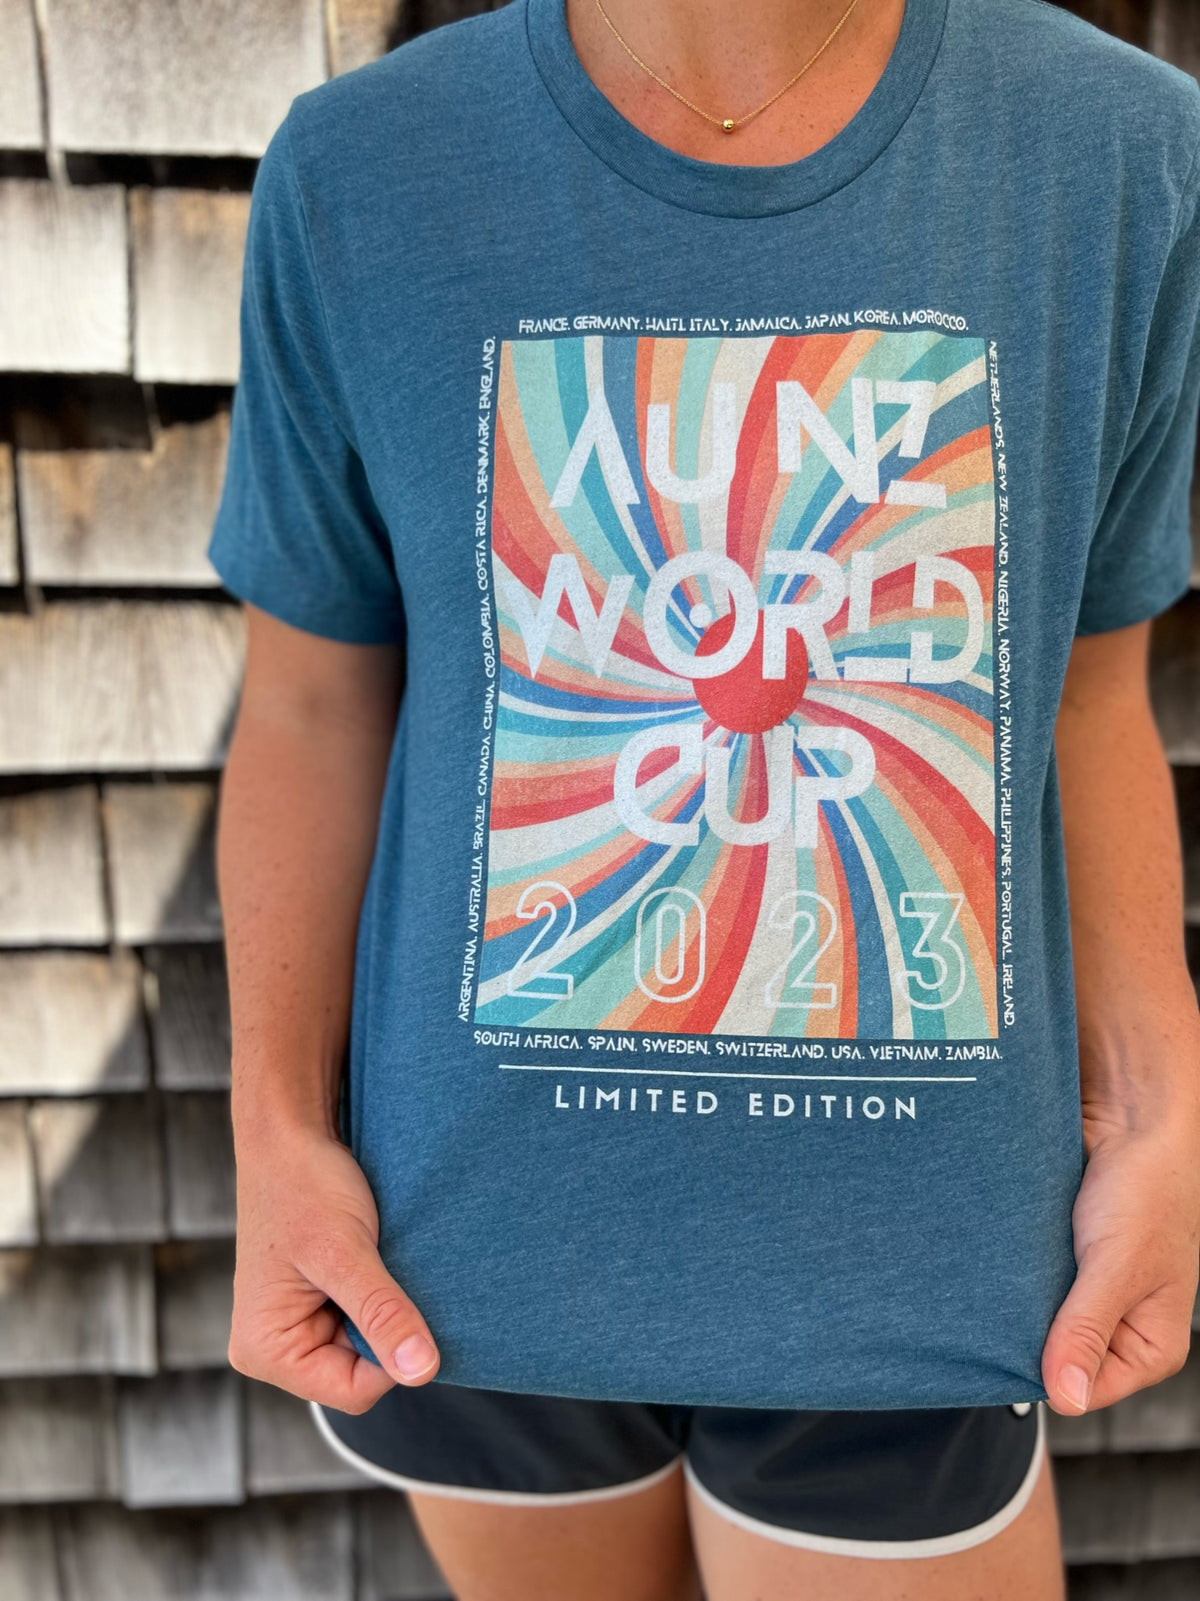 Limited Edition AU-NZ World Cup Adult T-Shirt